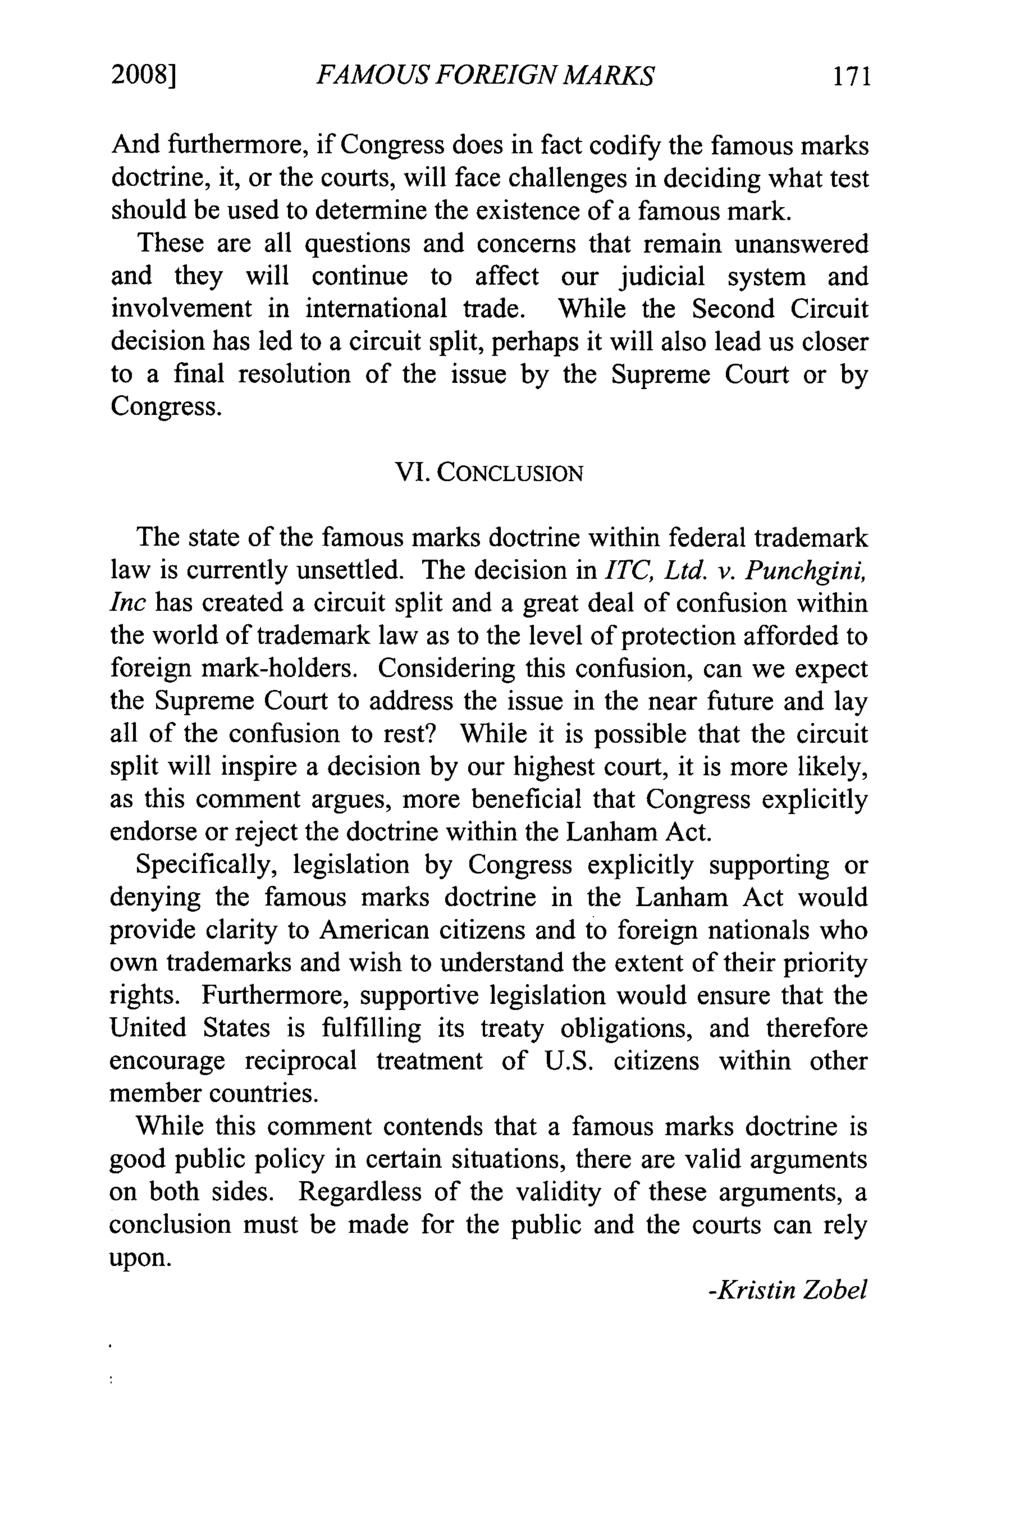 2008] Zobel: The Famous Marks Doctrine: Can and Should Well-Known Foreign Mark FAMOUS FOREIGN MARKS And furthermore, if Congress does in fact codify the famous marks doctrine, it, or the courts, will